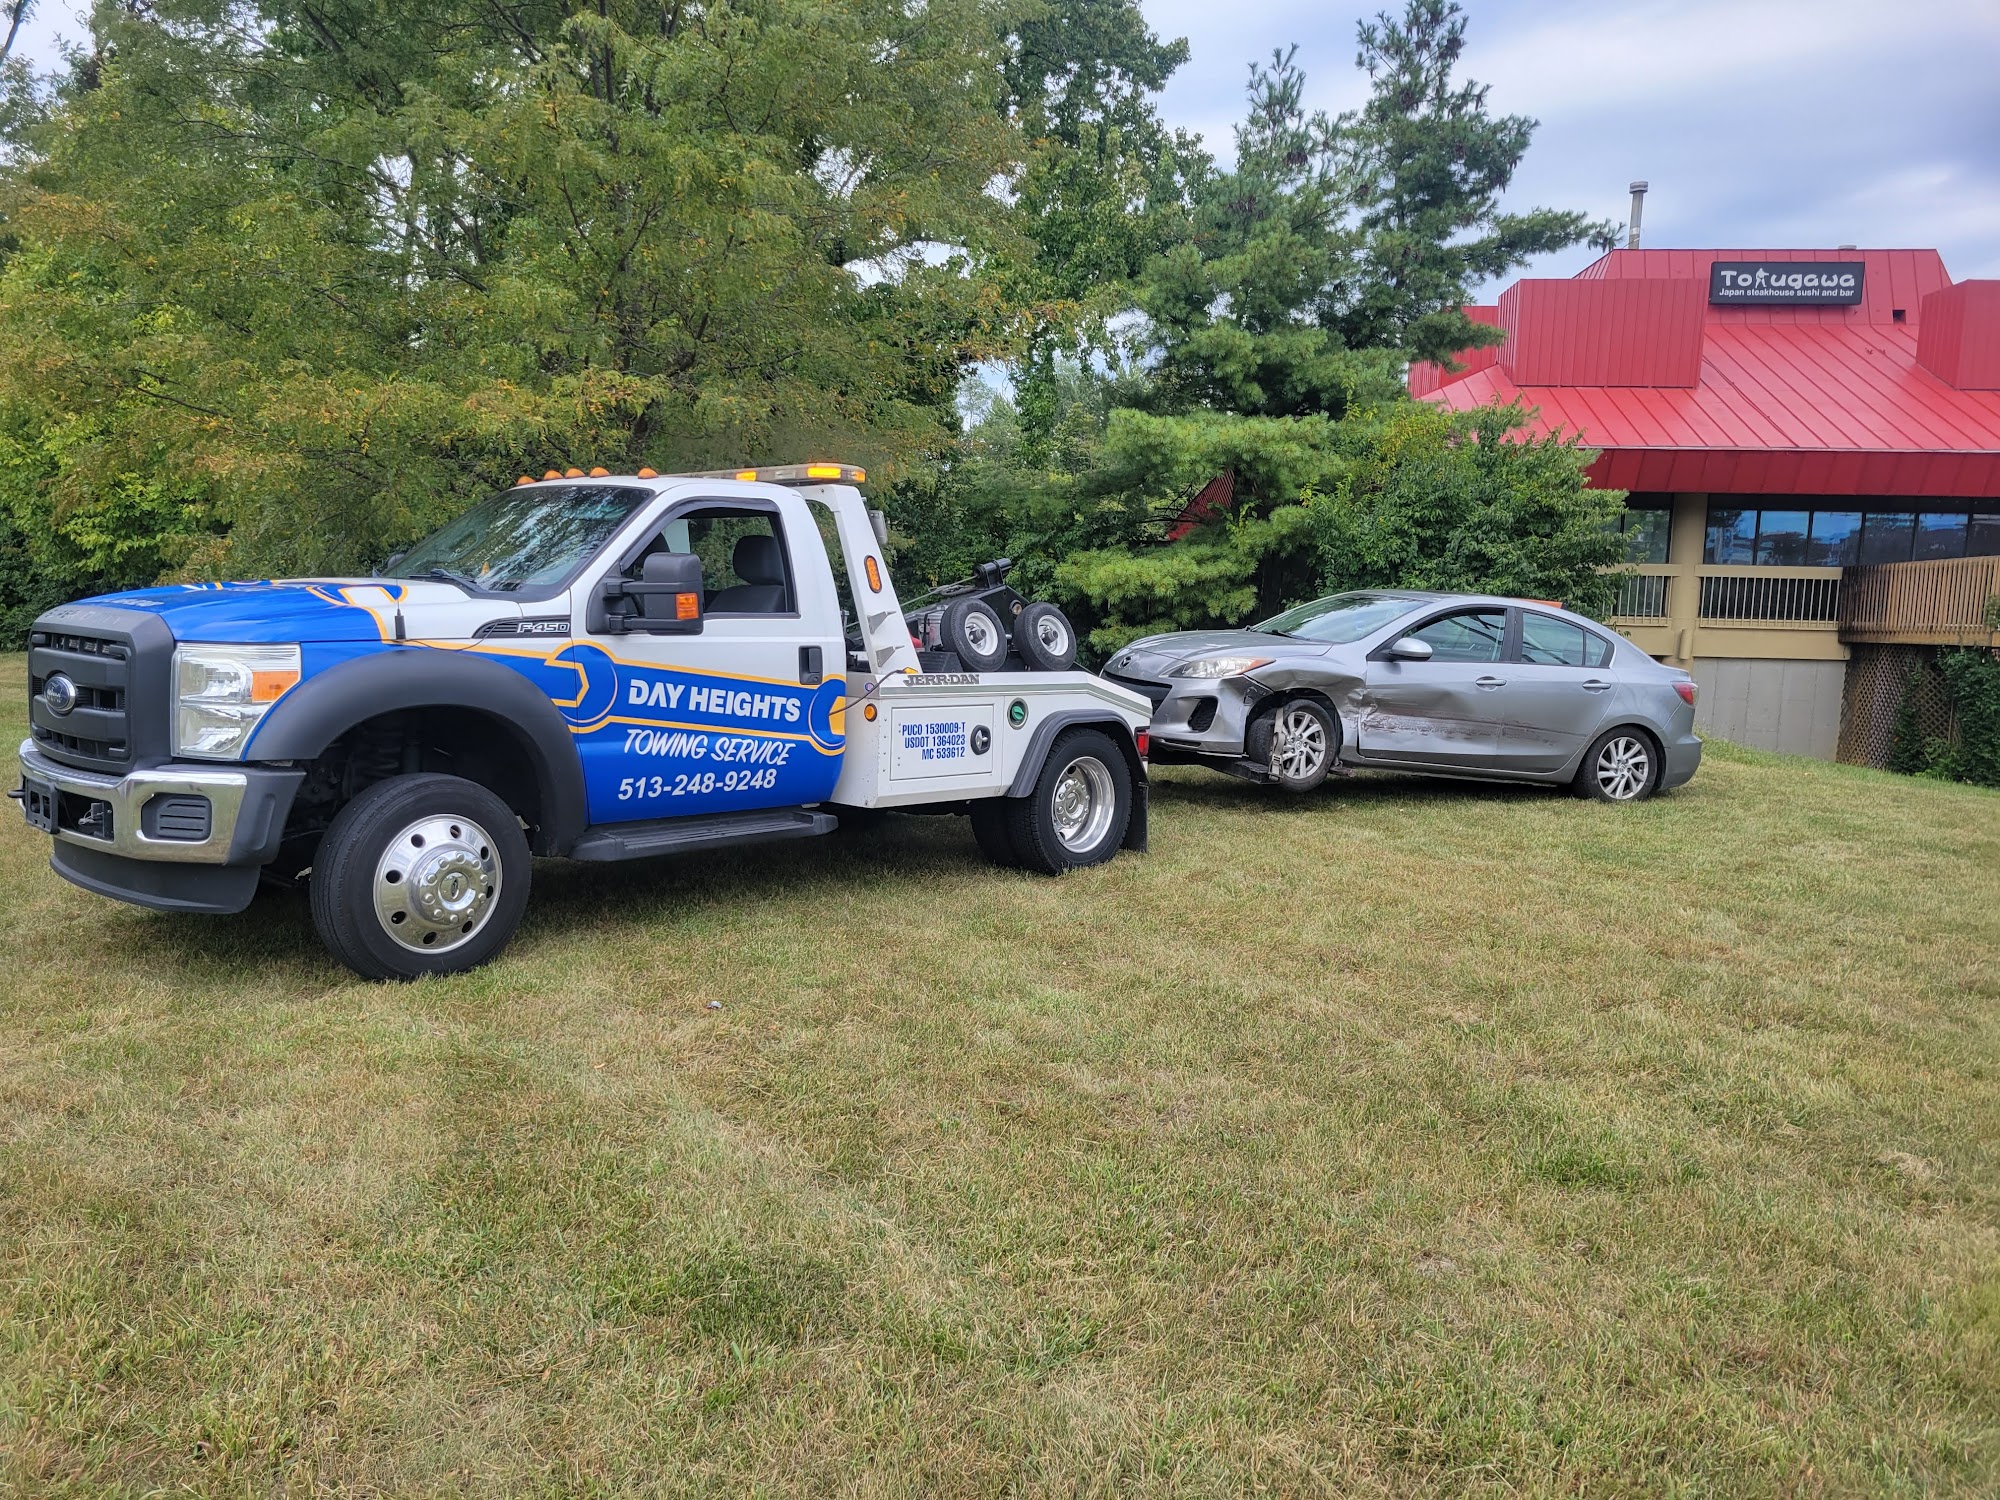 Day Heights Towing Service